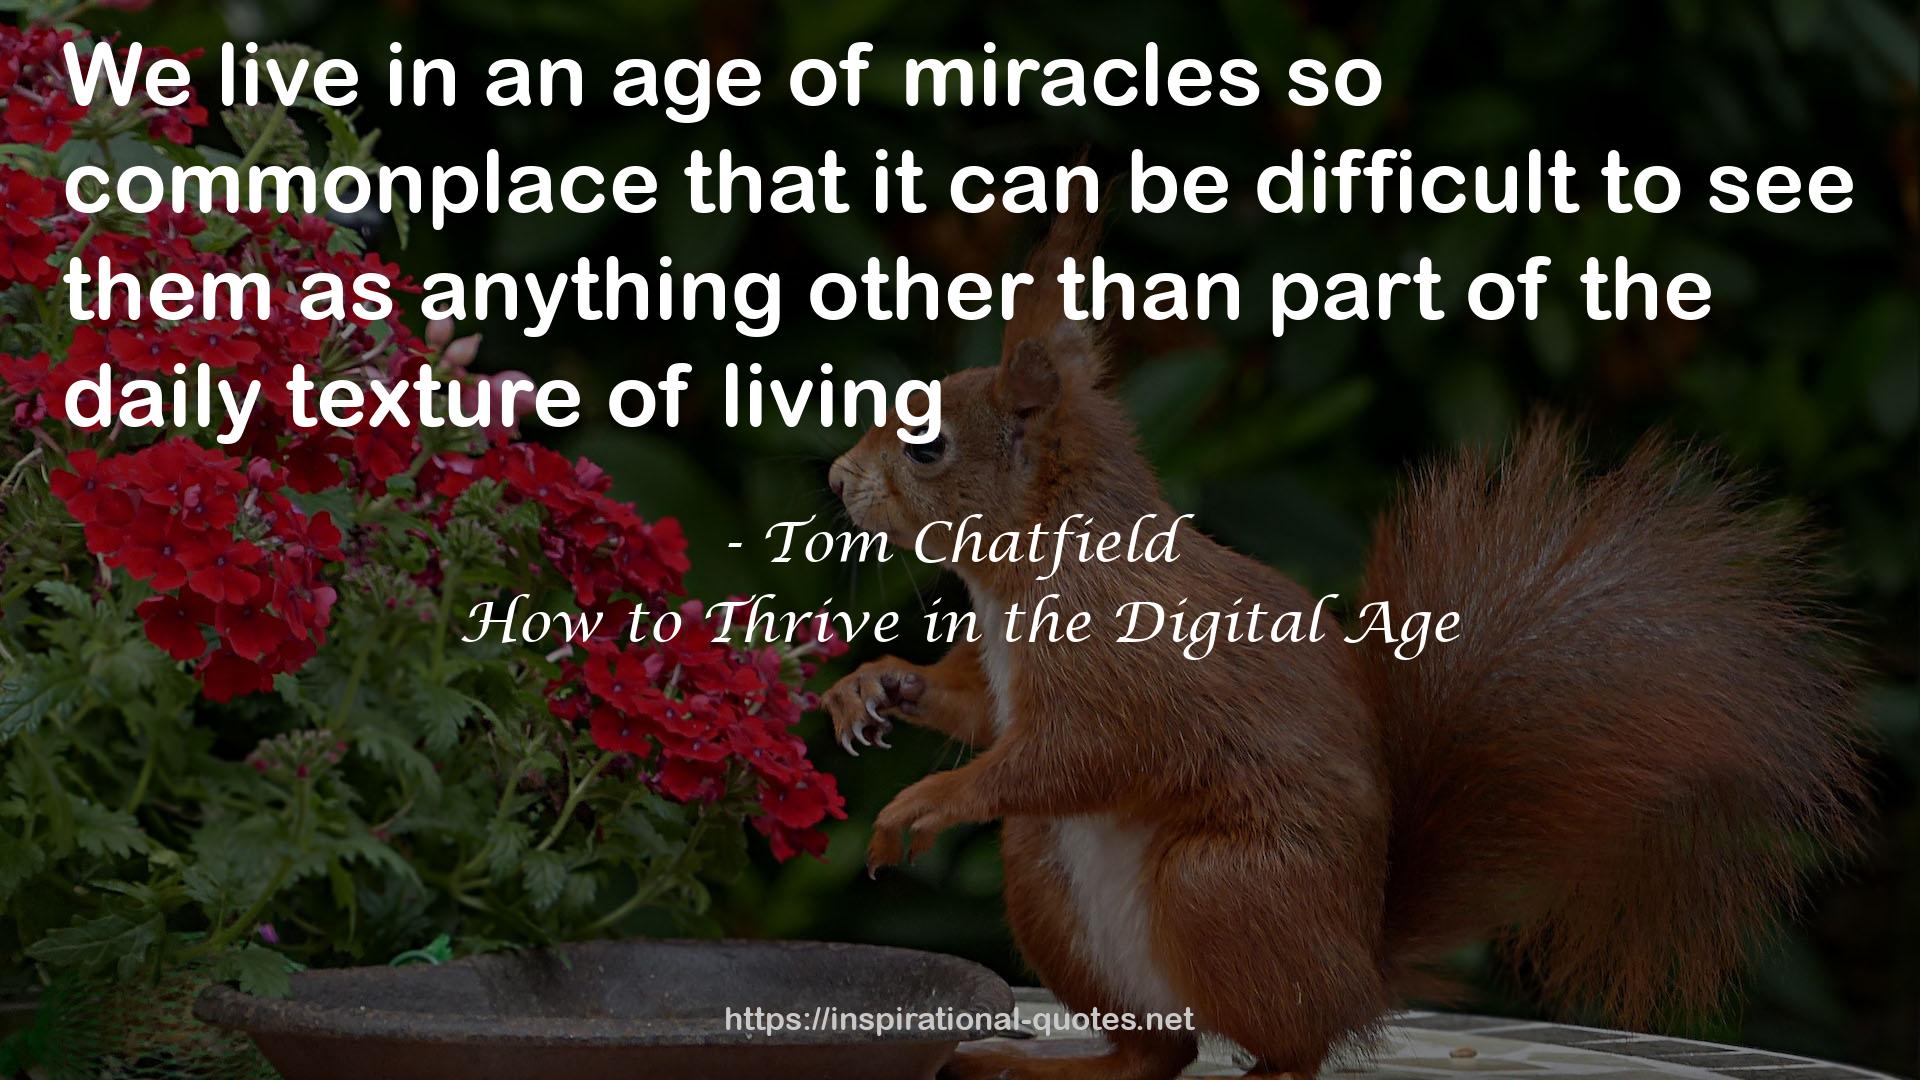 Tom Chatfield QUOTES